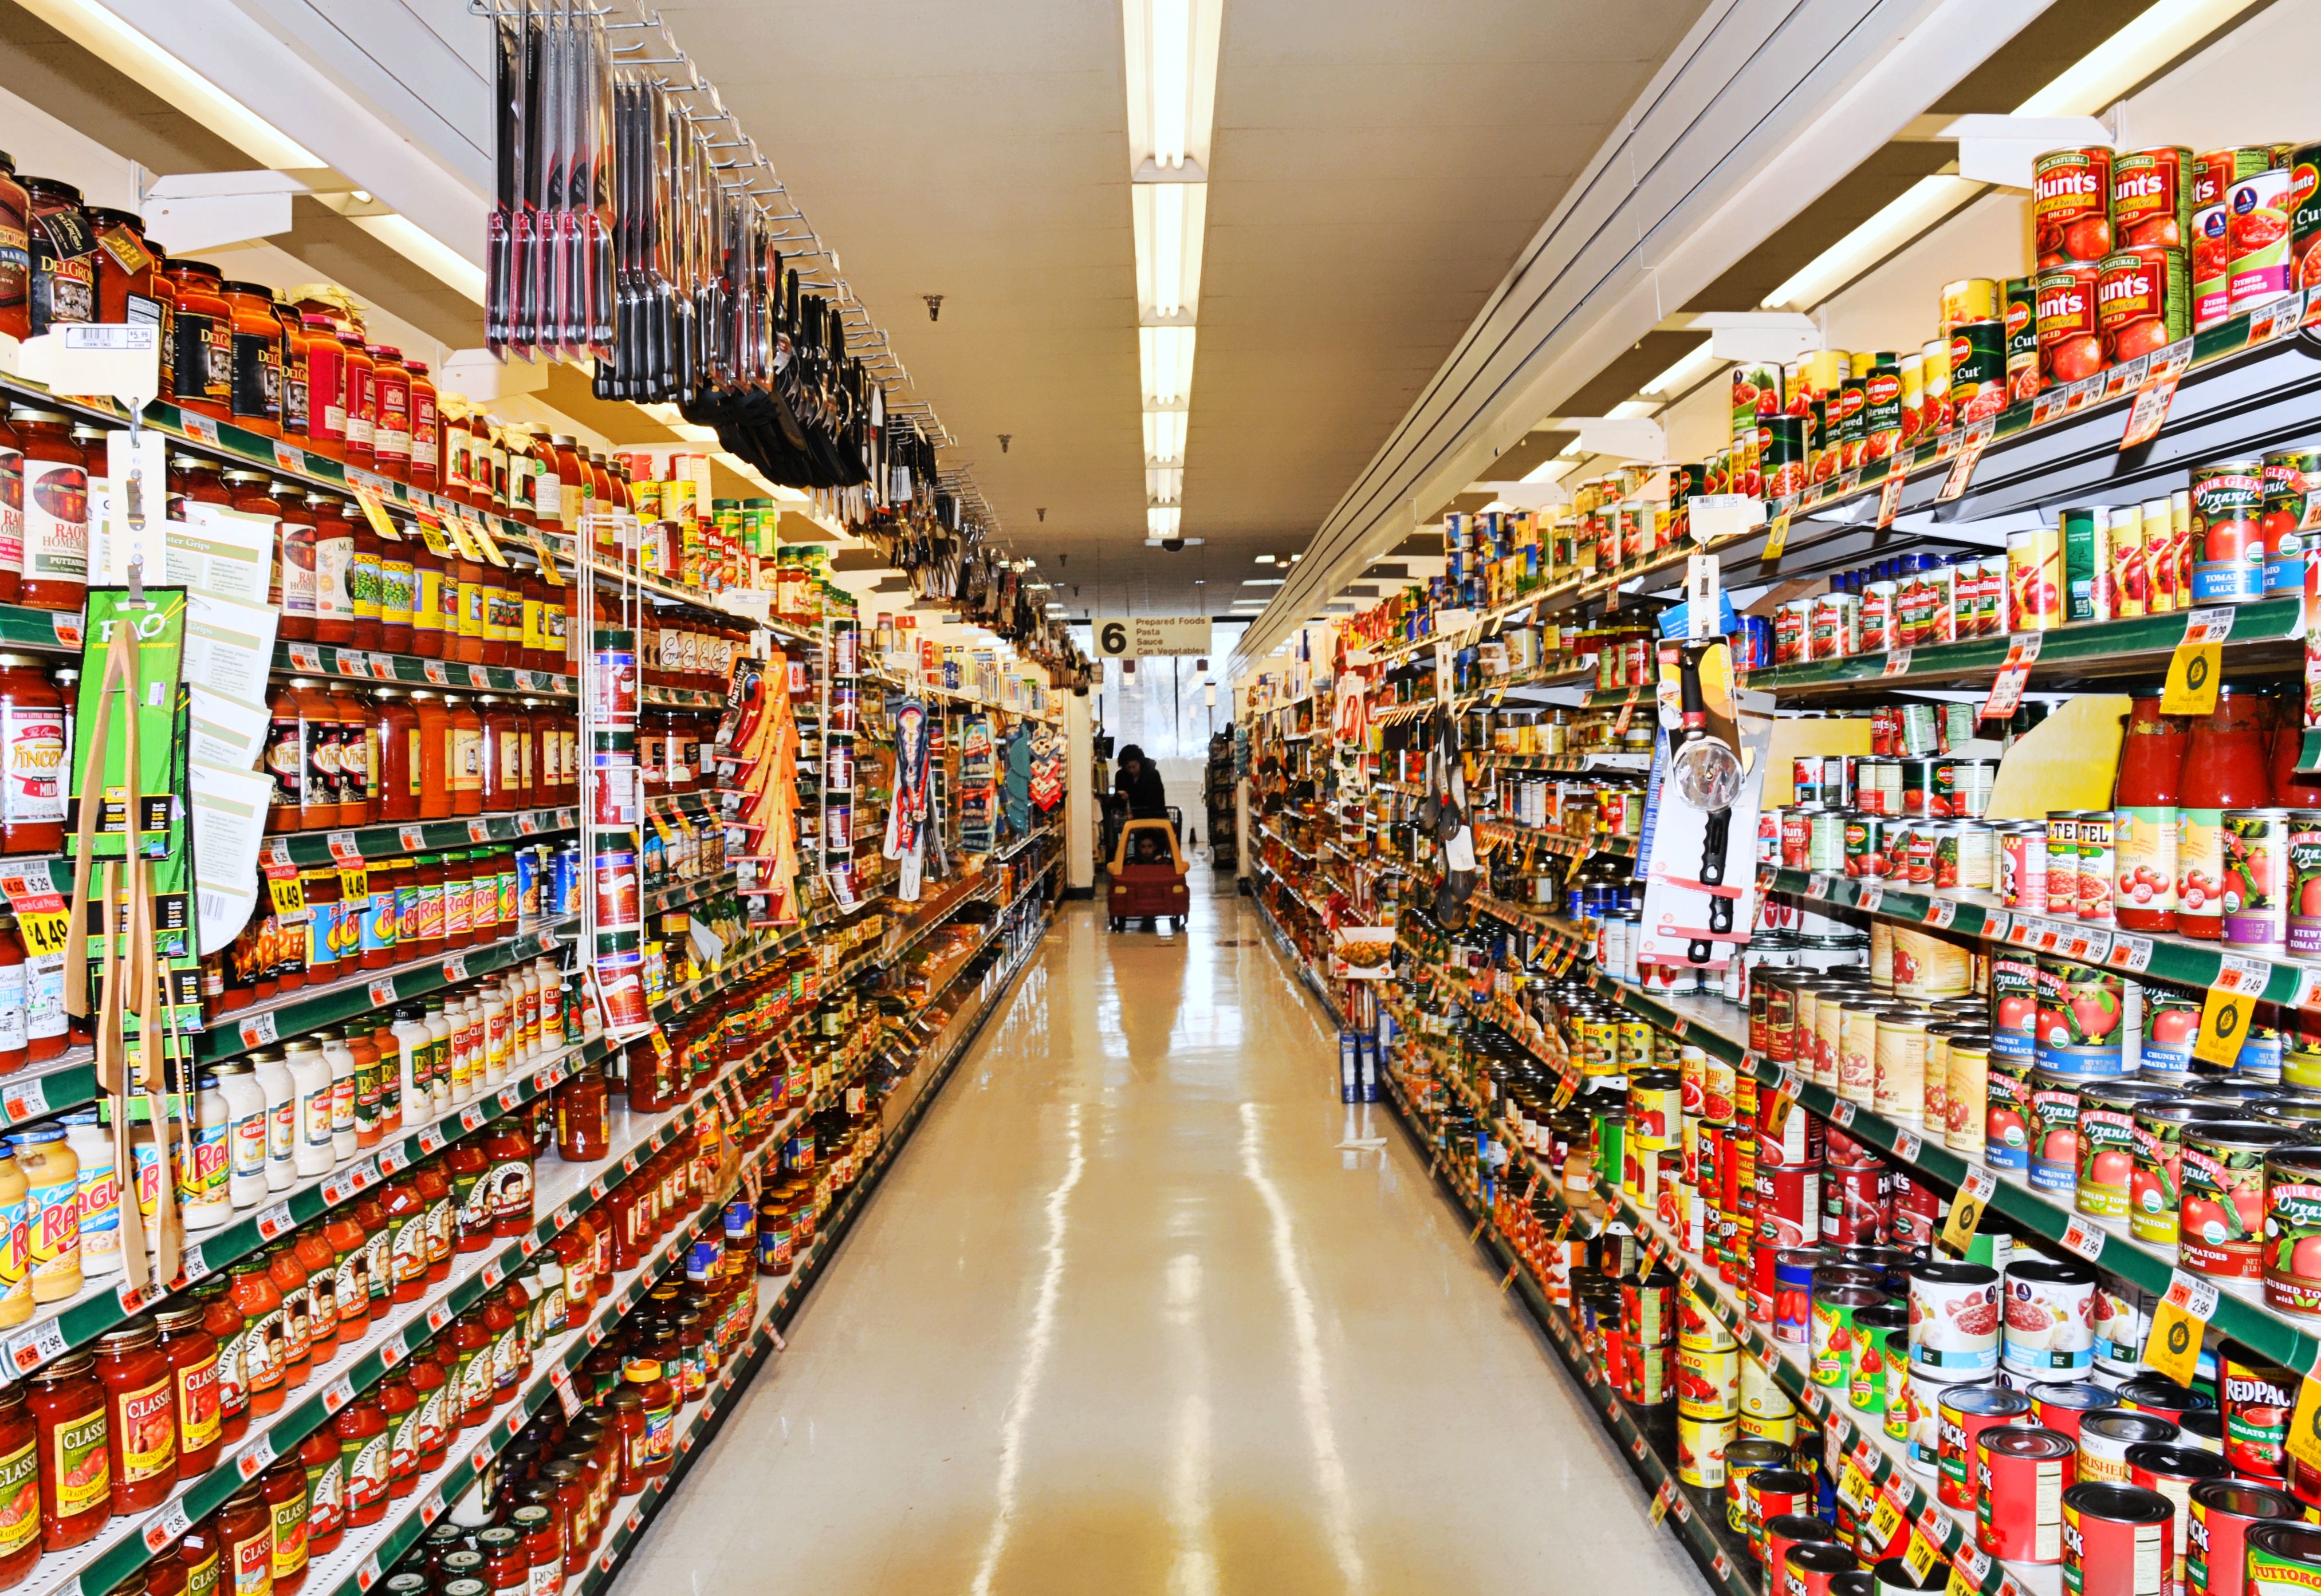 Aisle at supermarket with shopper and shopping cart (Diana Angstadt—FlickrVision)